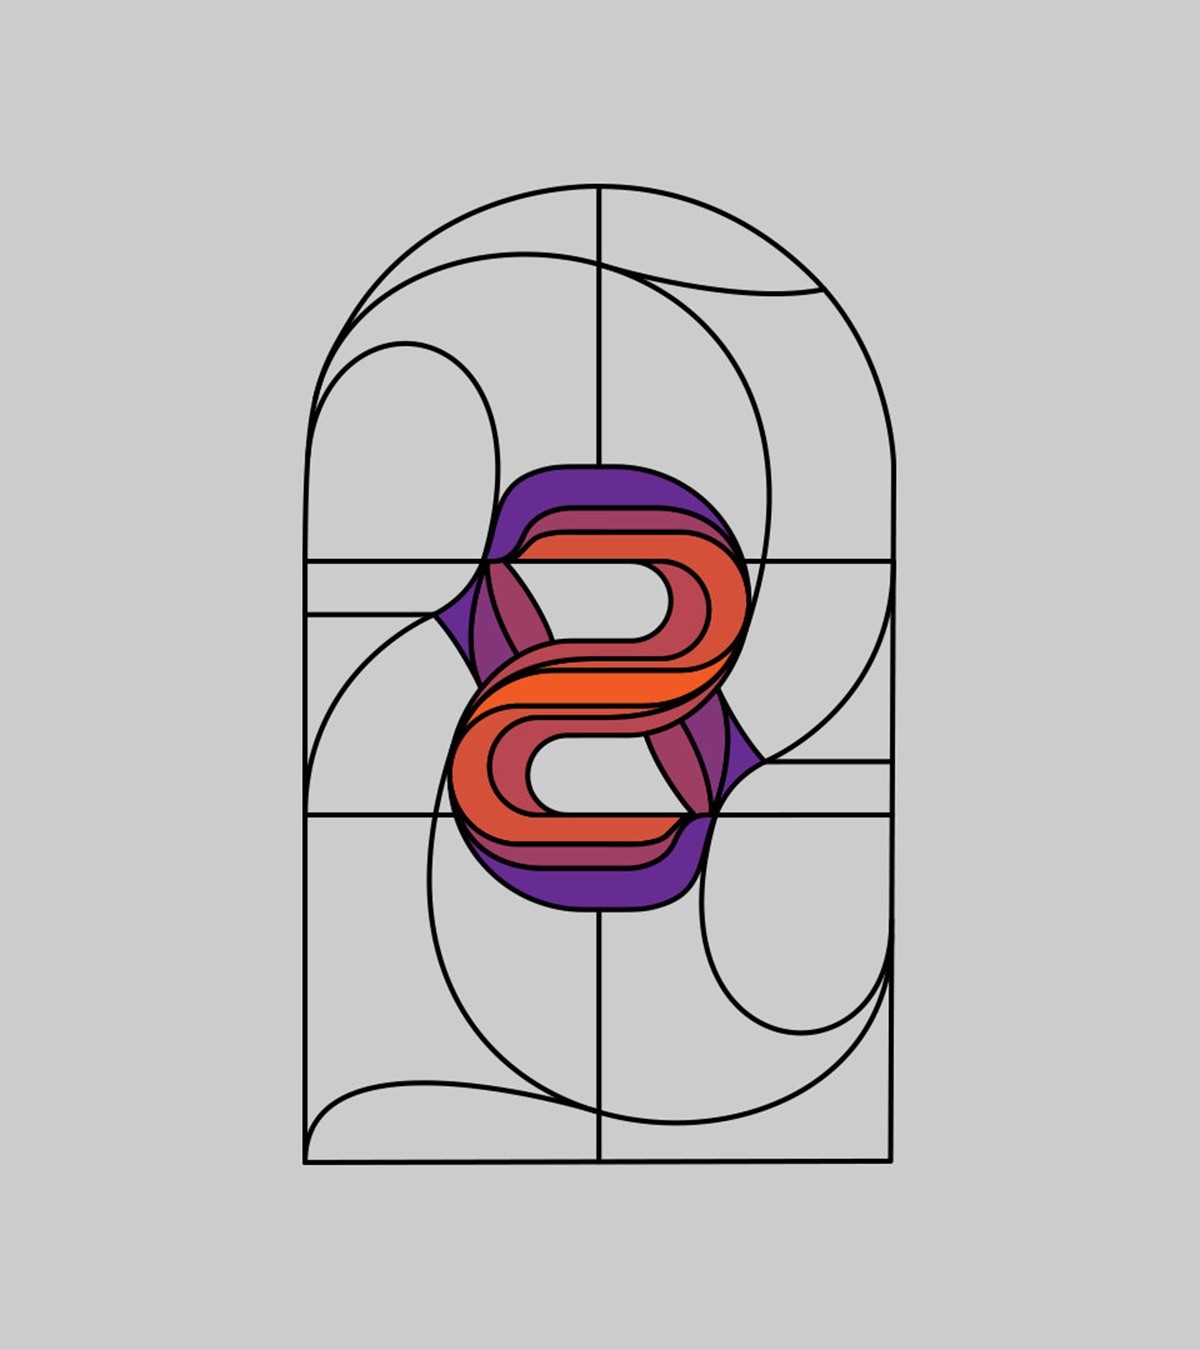 BLK LTR type experiment re-visited. No. 8 Stain glass design by Superfried, Manchester.